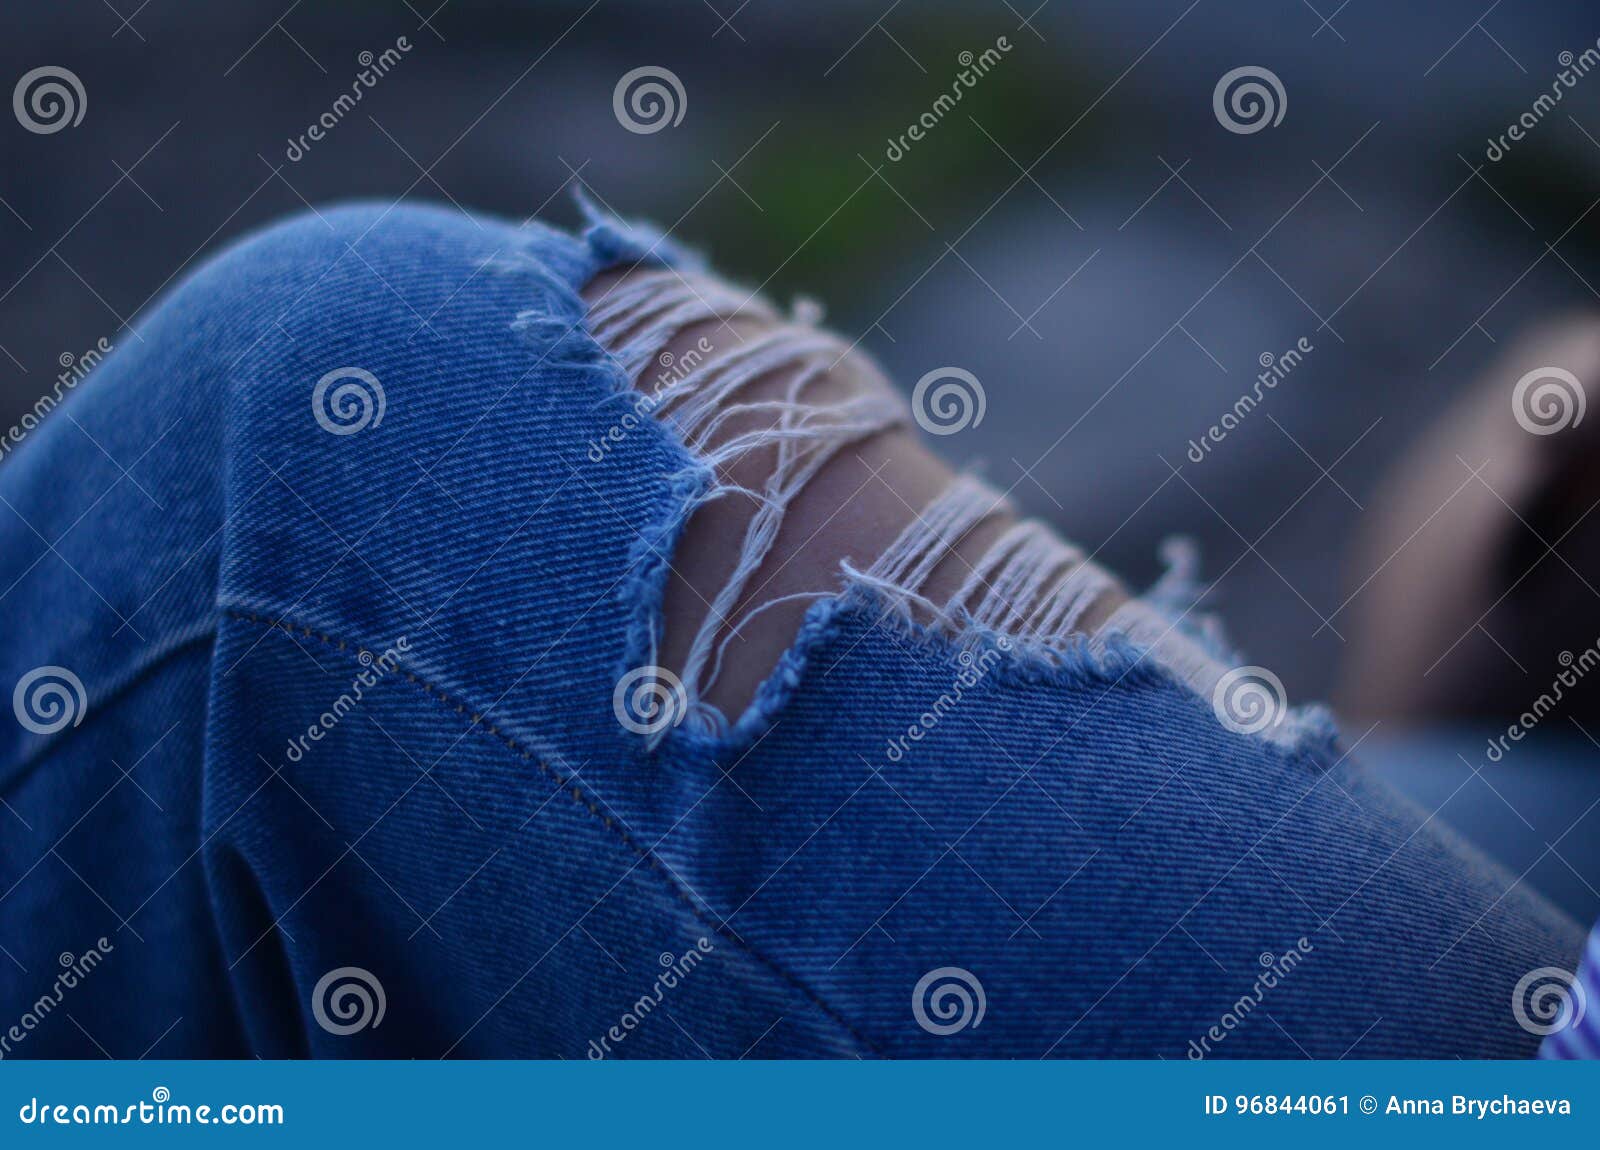 Ripped jeans stock image. Image of embankment, ragged - 96844061